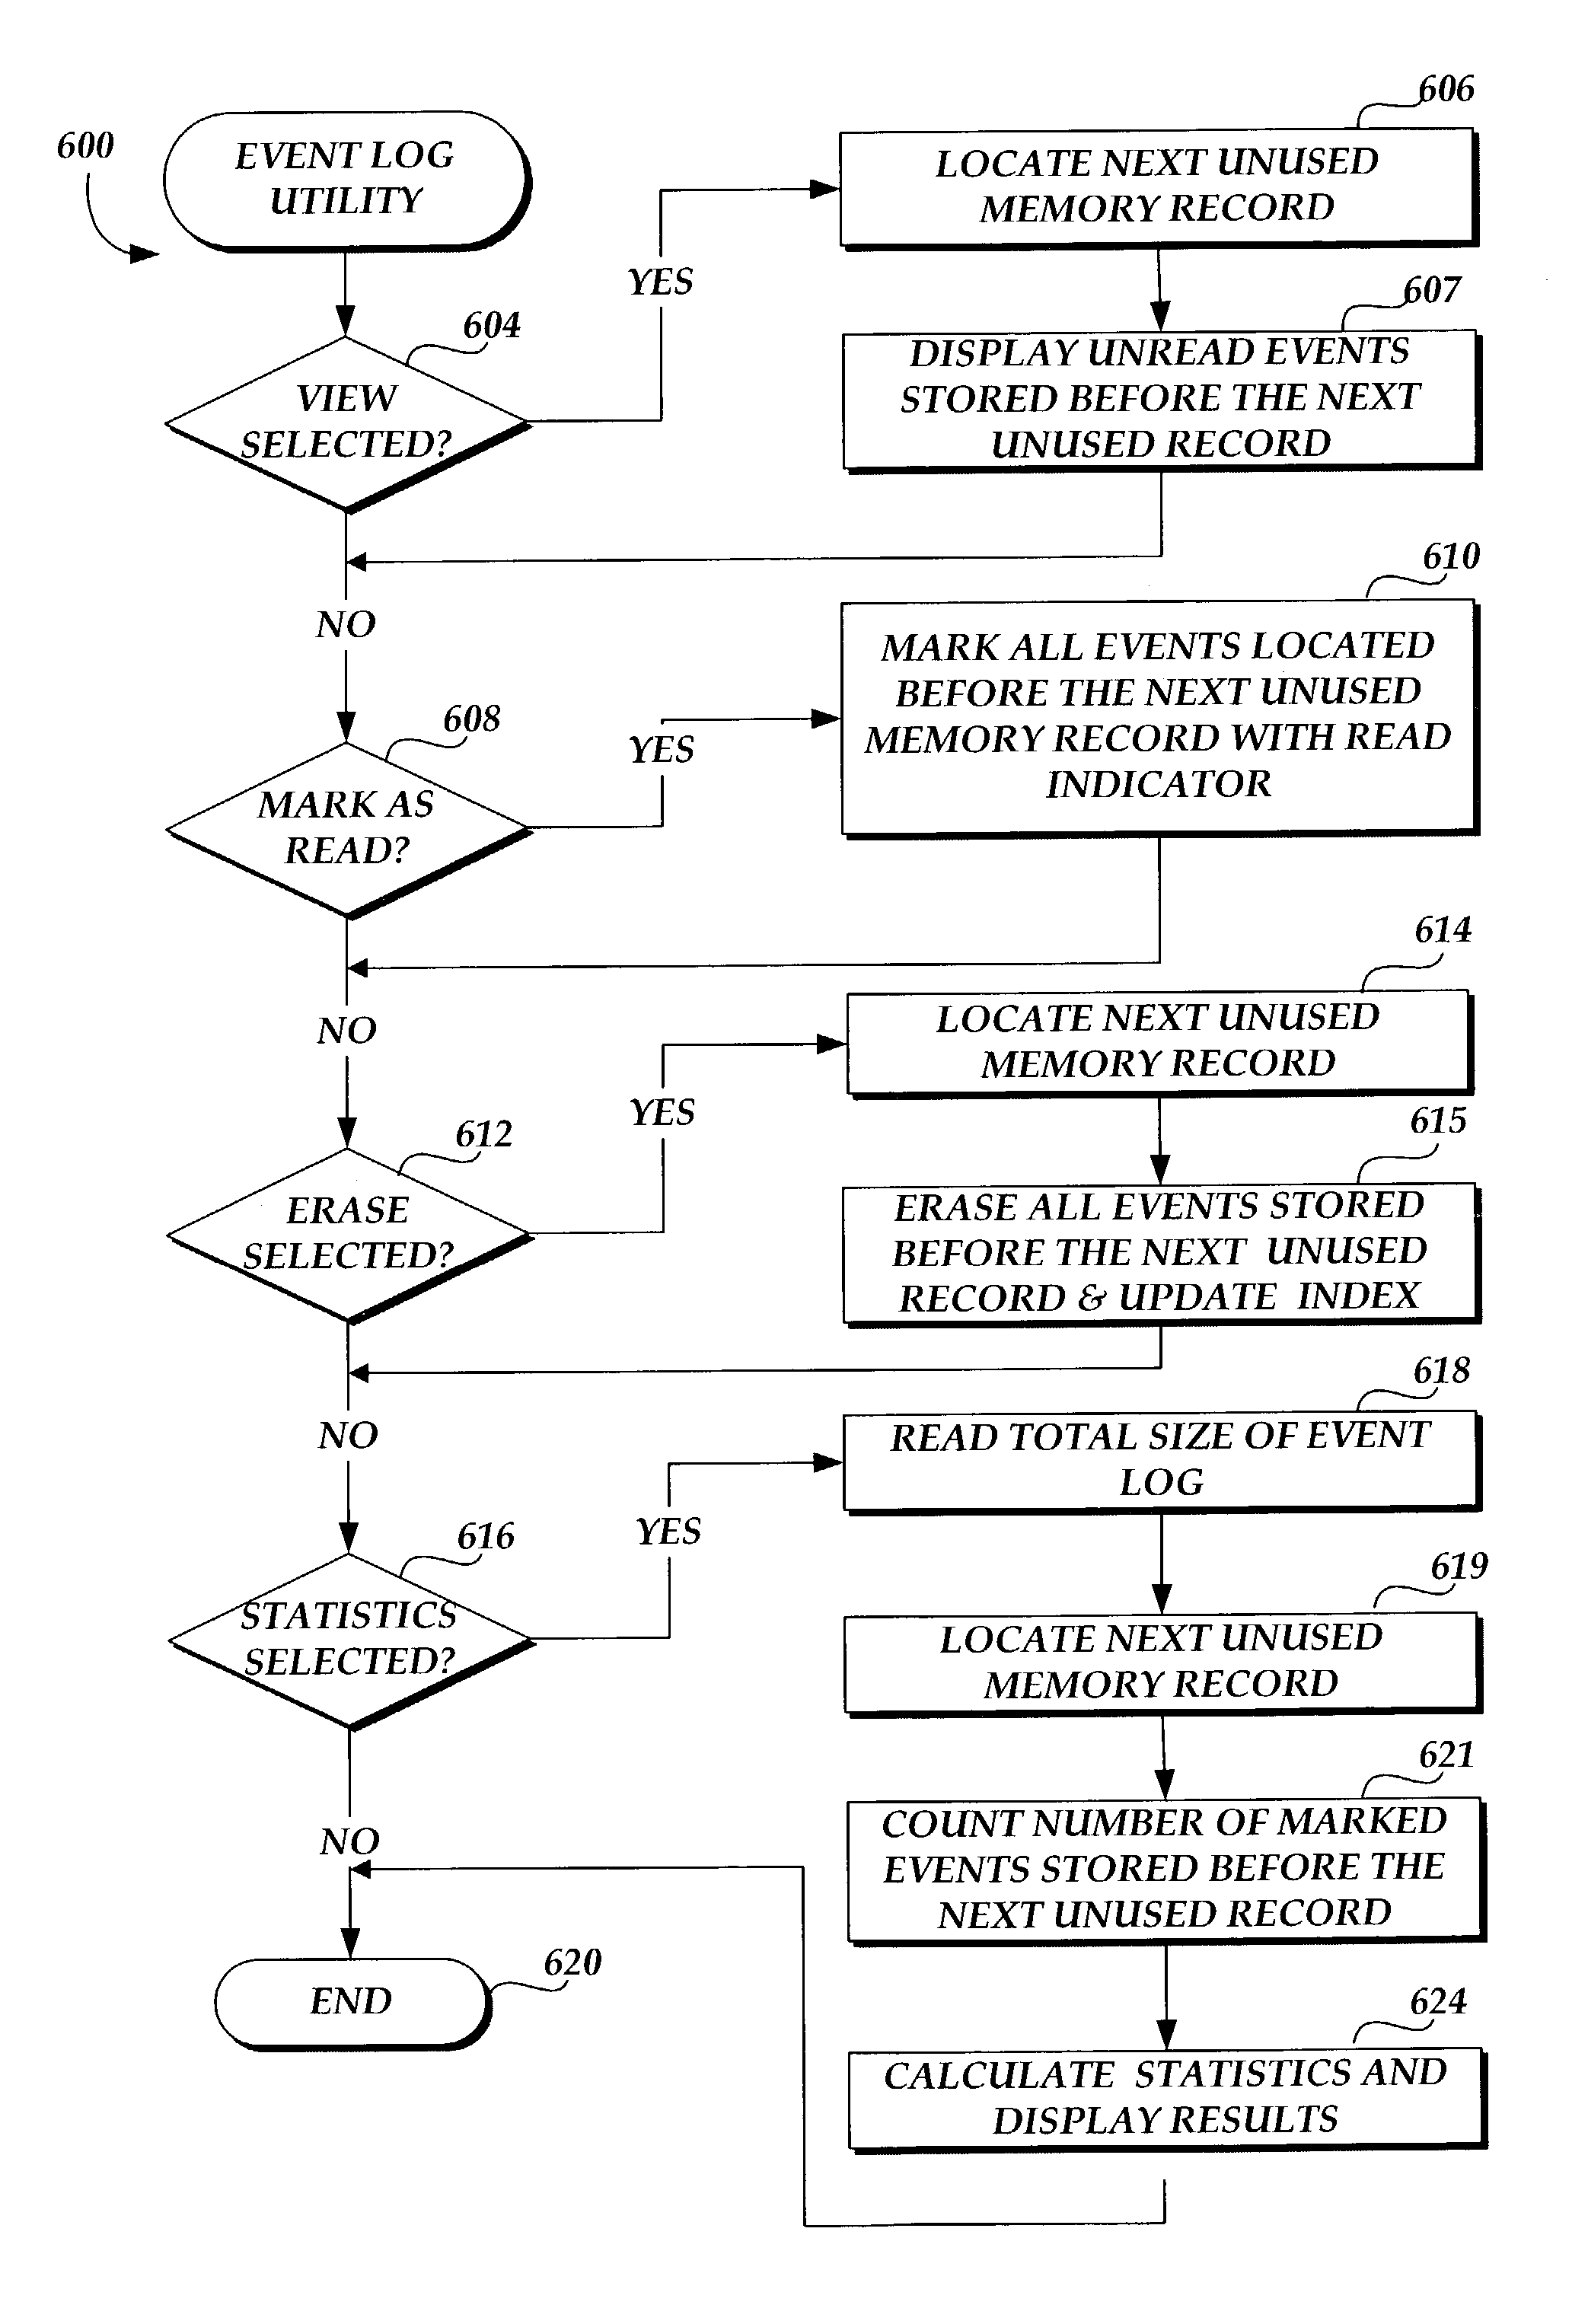 Method and system for managing the contents of an event log stored within a computer